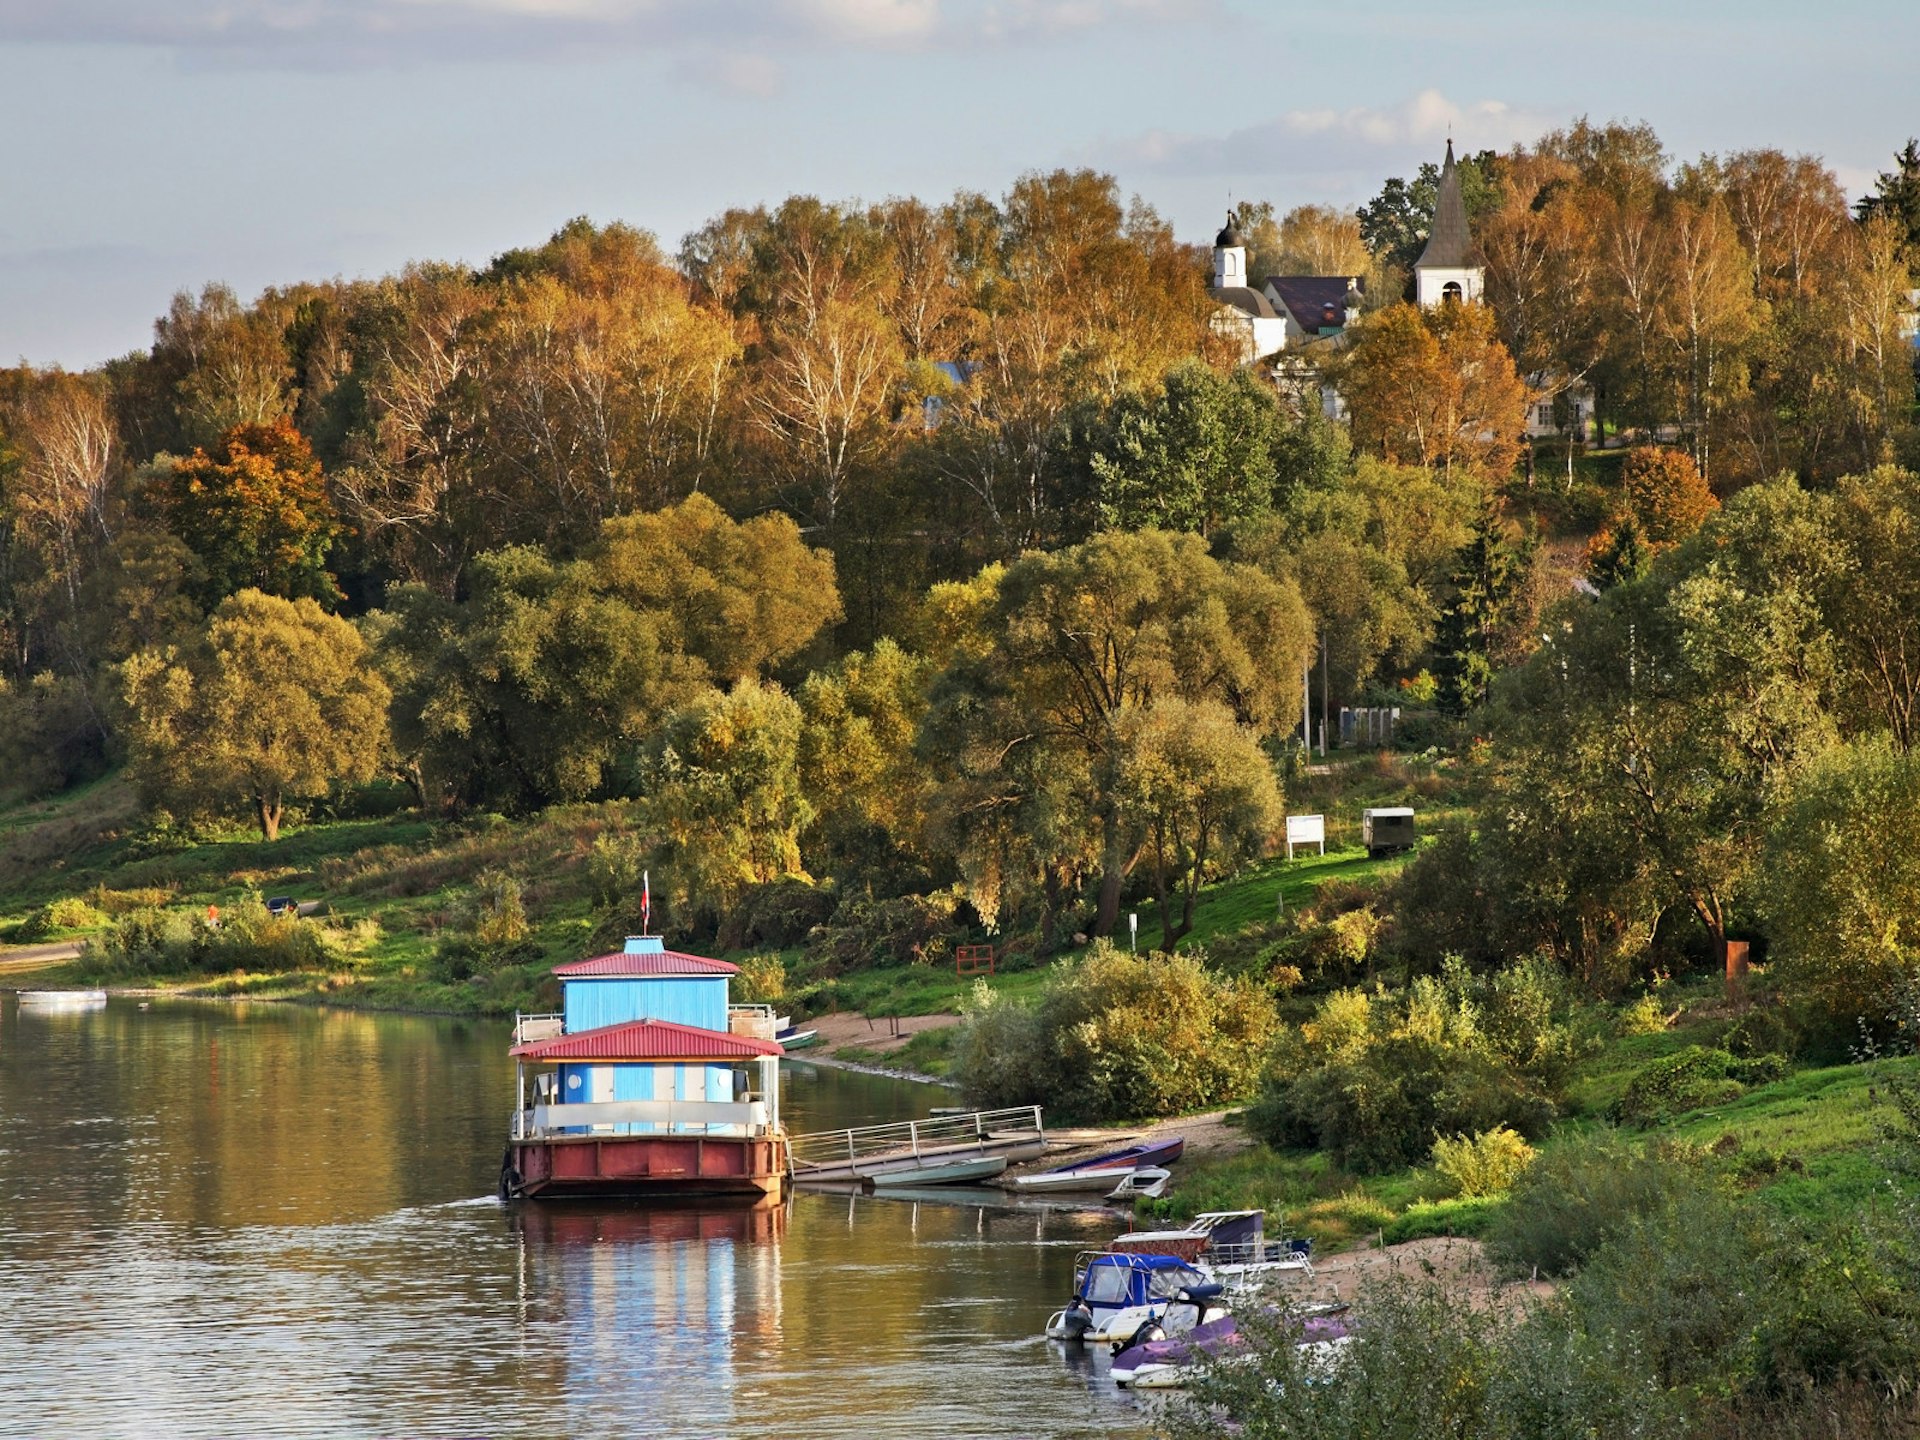 The jetty on the Oka River in the quaint town of Tarusa, a haunt for creative types © Andrey Shevchenko / Shutterstock